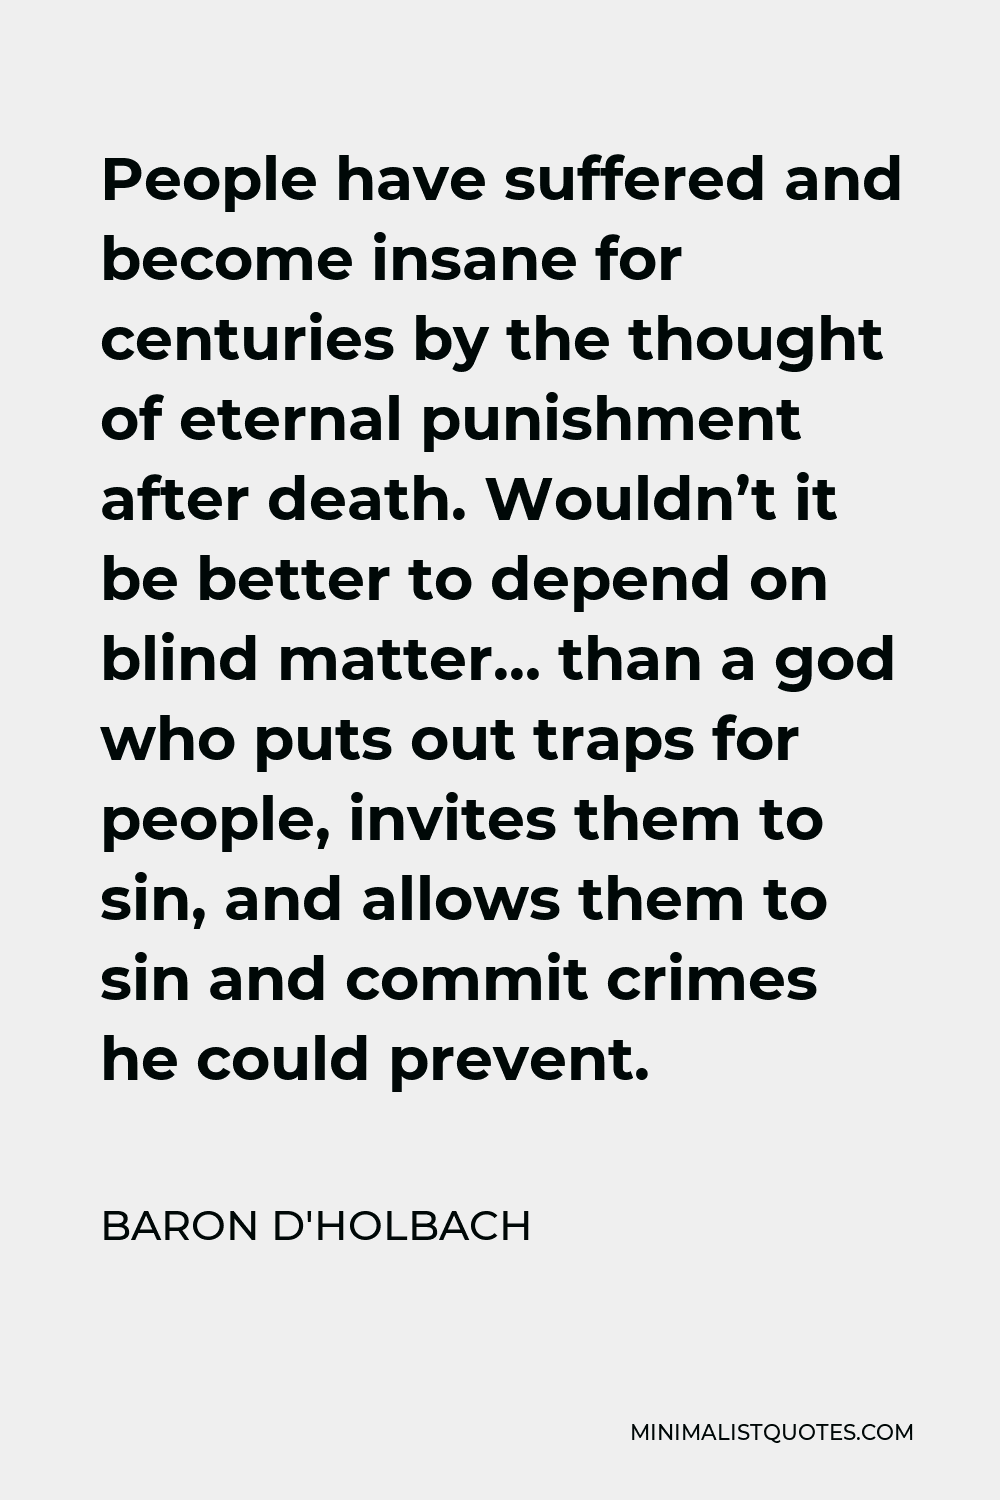 Baron d'Holbach Quote - People have suffered and become insane for centuries by the thought of eternal punishment after death. Wouldn’t it be better to depend on blind matter… than a god who puts out traps for people, invites them to sin, and allows them to sin and commit crimes he could prevent.